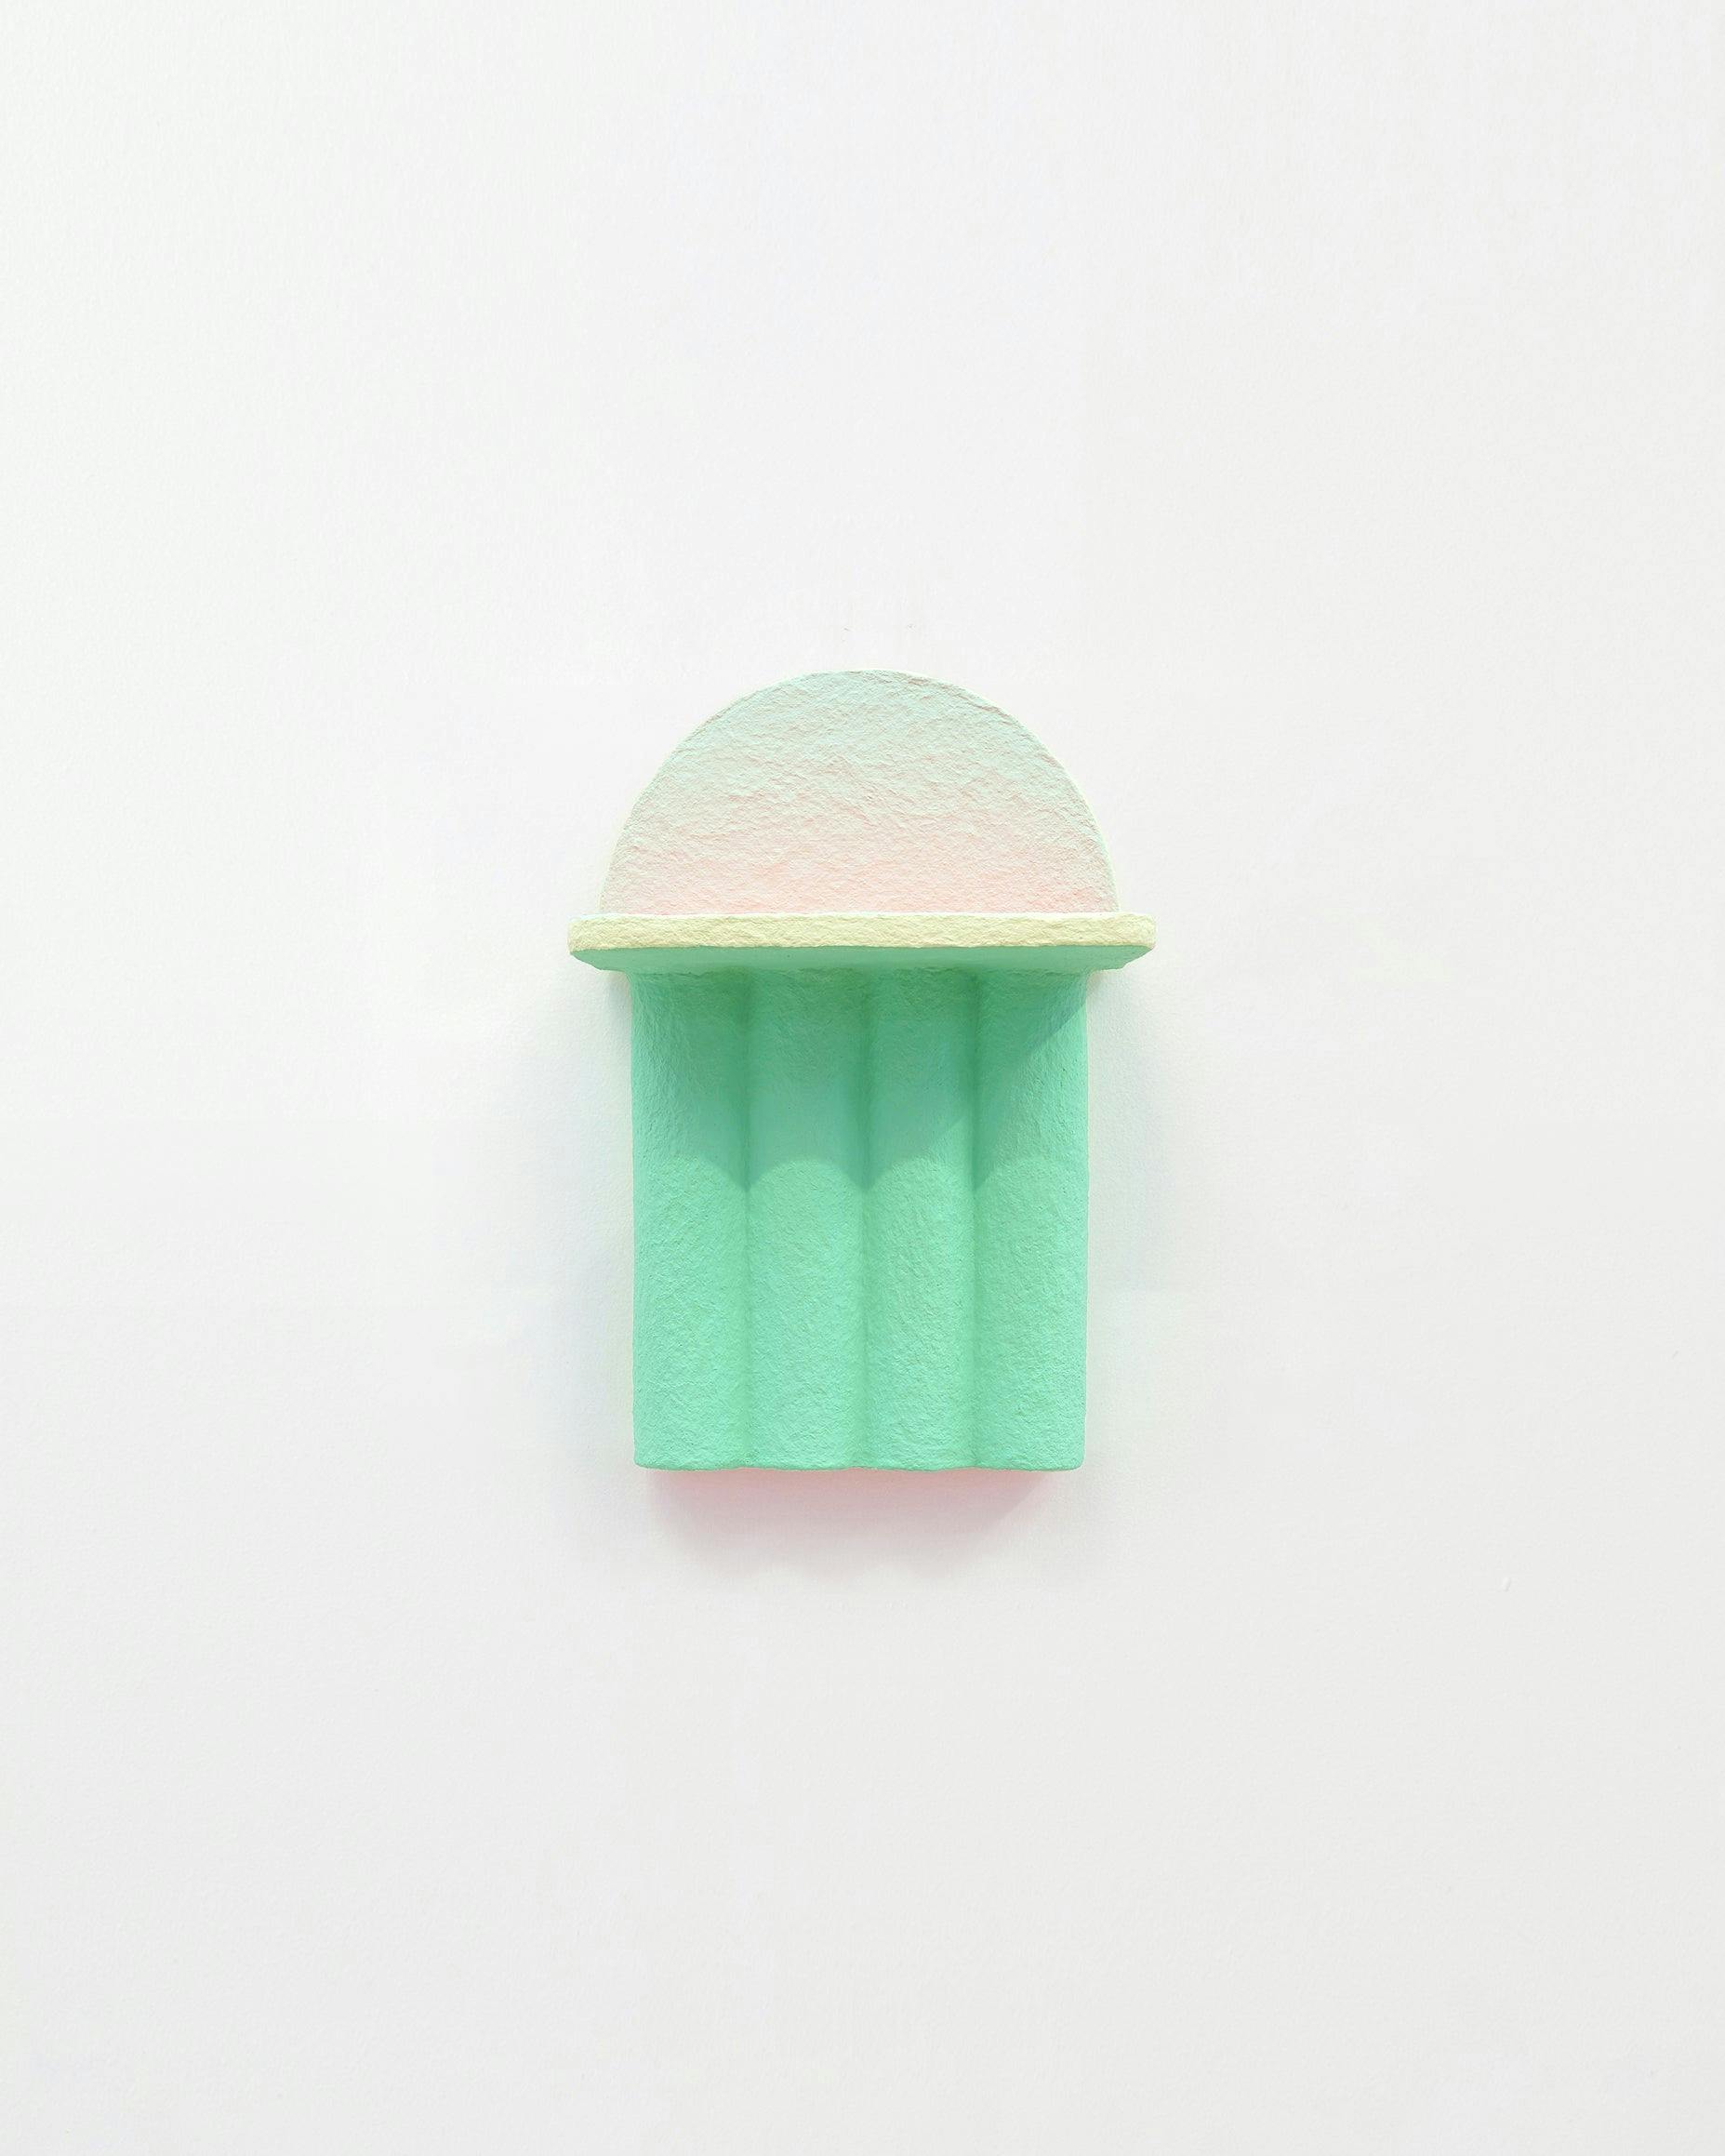 Mixed Media by Adam Frezza & Terri Chiao (CHIAOZZA) titled "Shrine to Nothingness (Pale Mint, Mint Green, Luminous Red)".